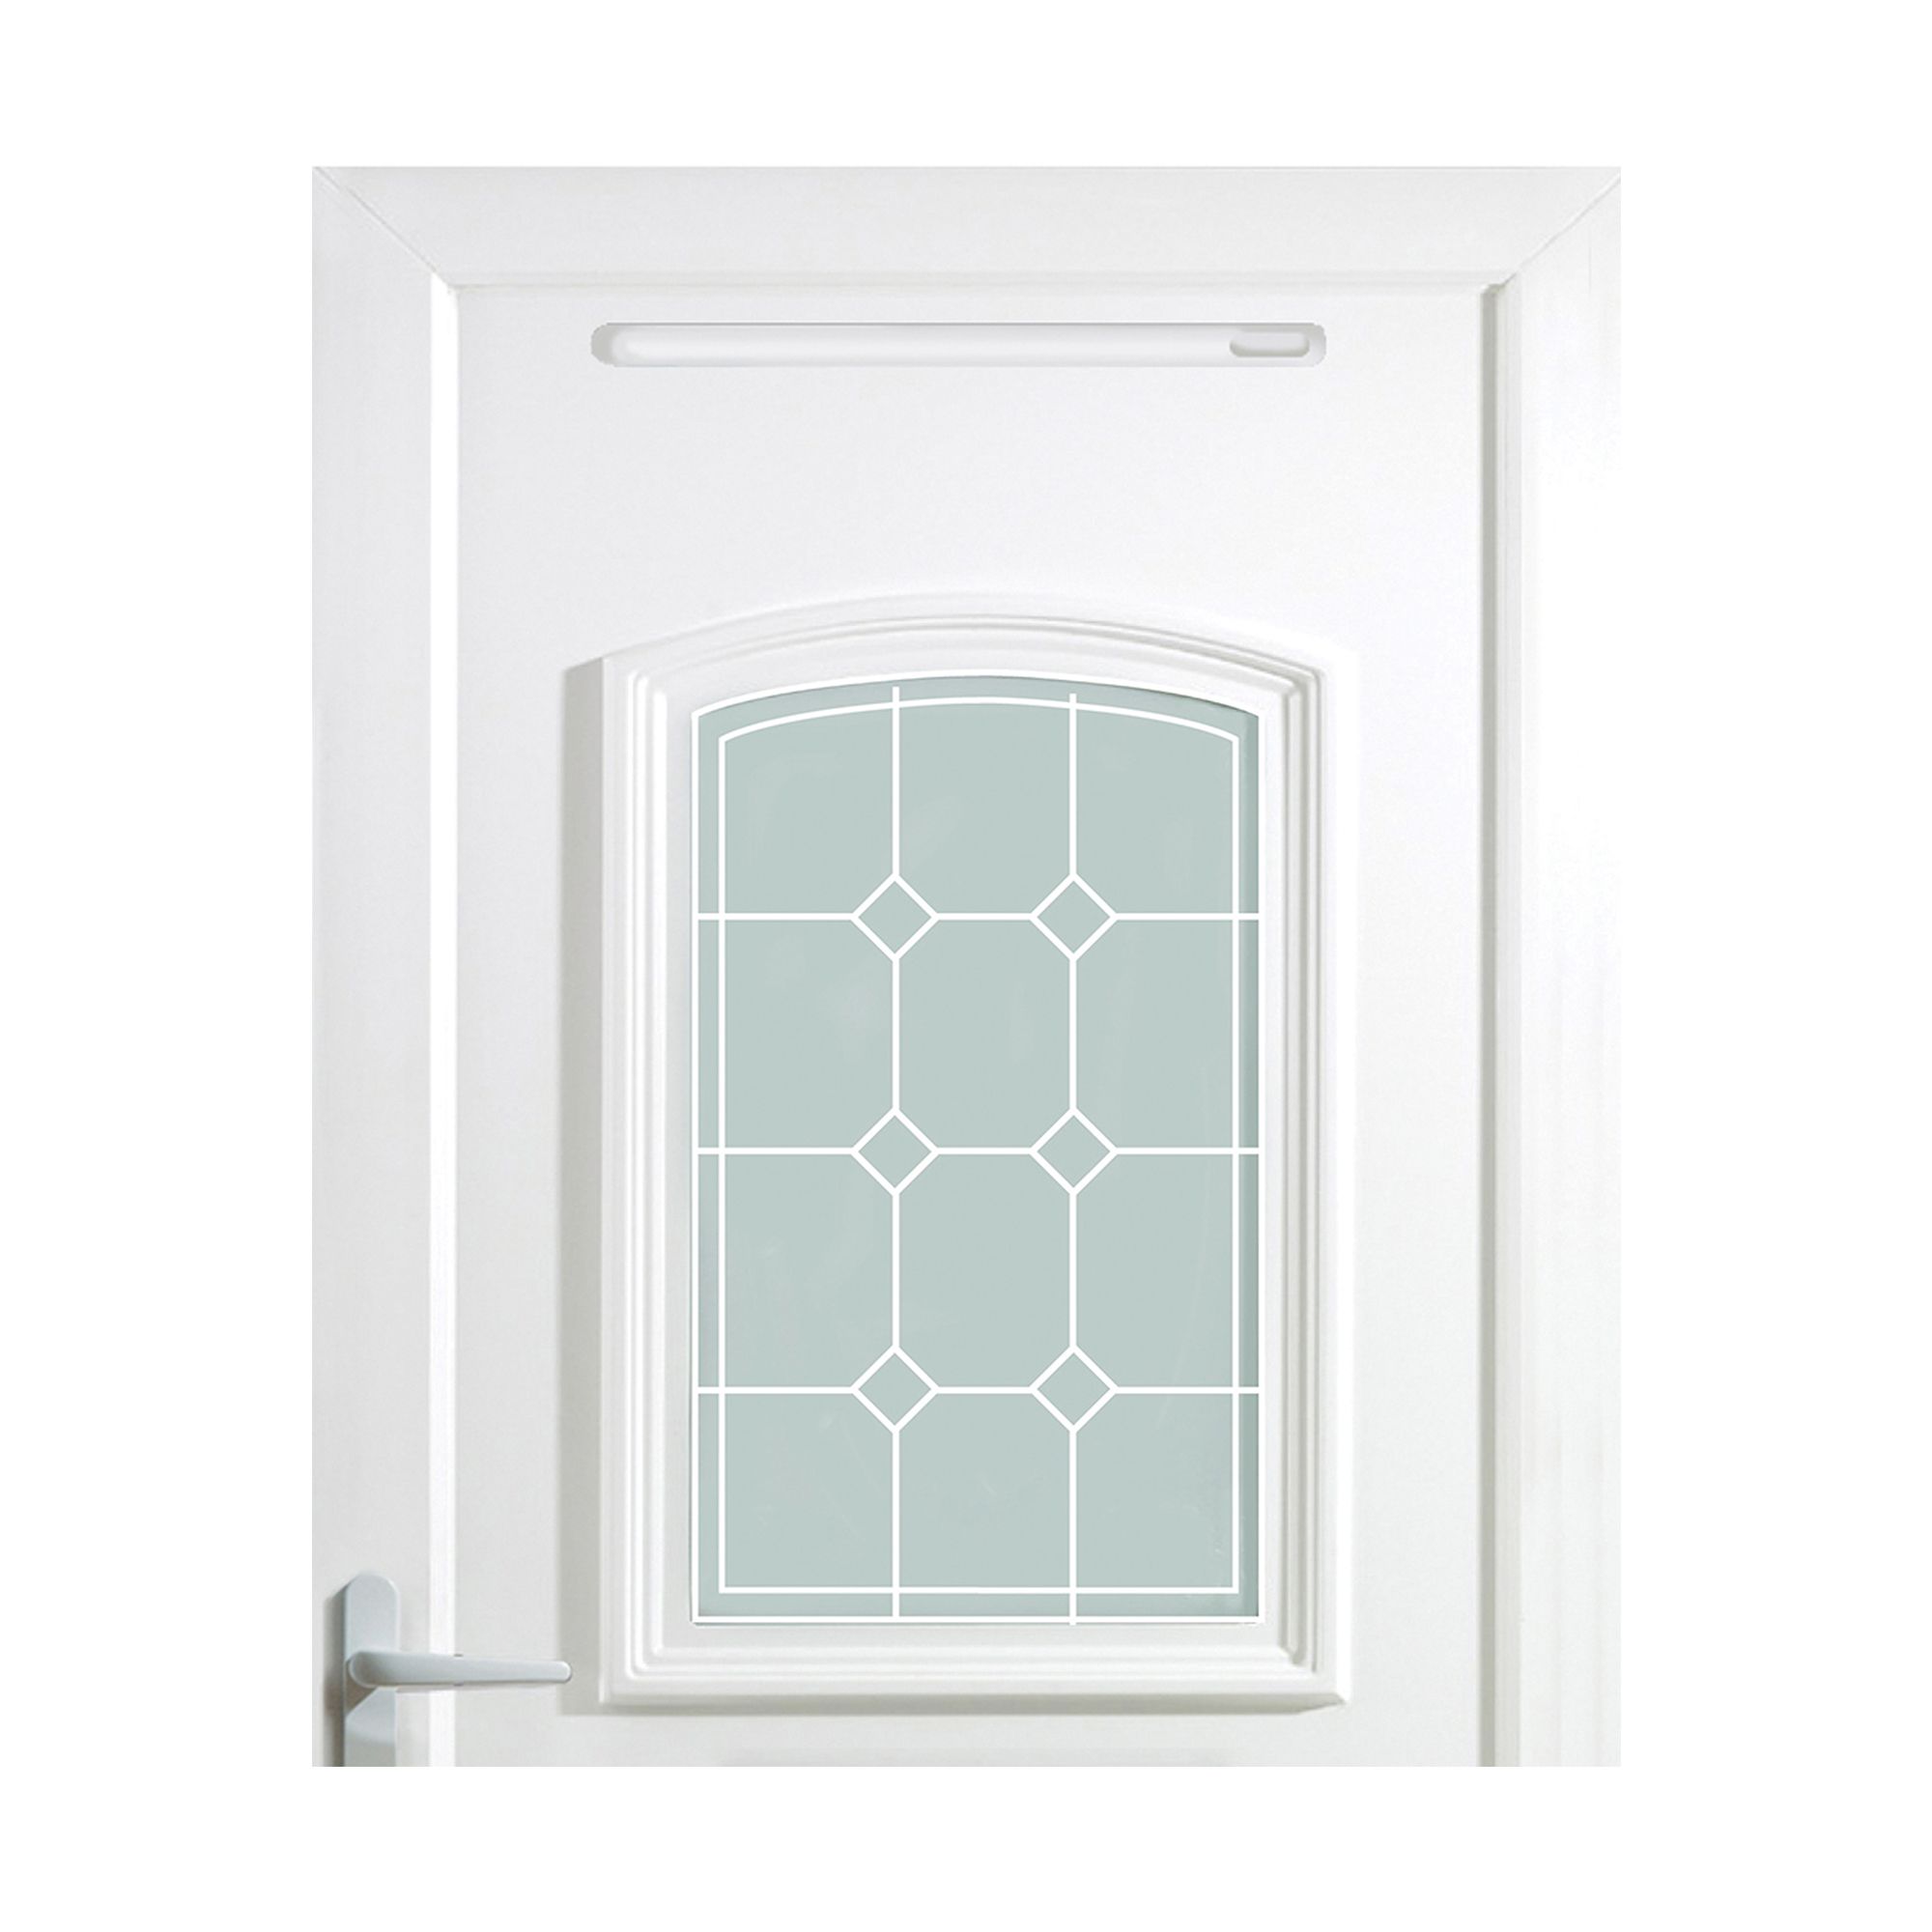 Ashgrove 2 panel Diamond bevel Frosted Glazed White Right-hand External Front Door set, (H)2055mm (W)920mm